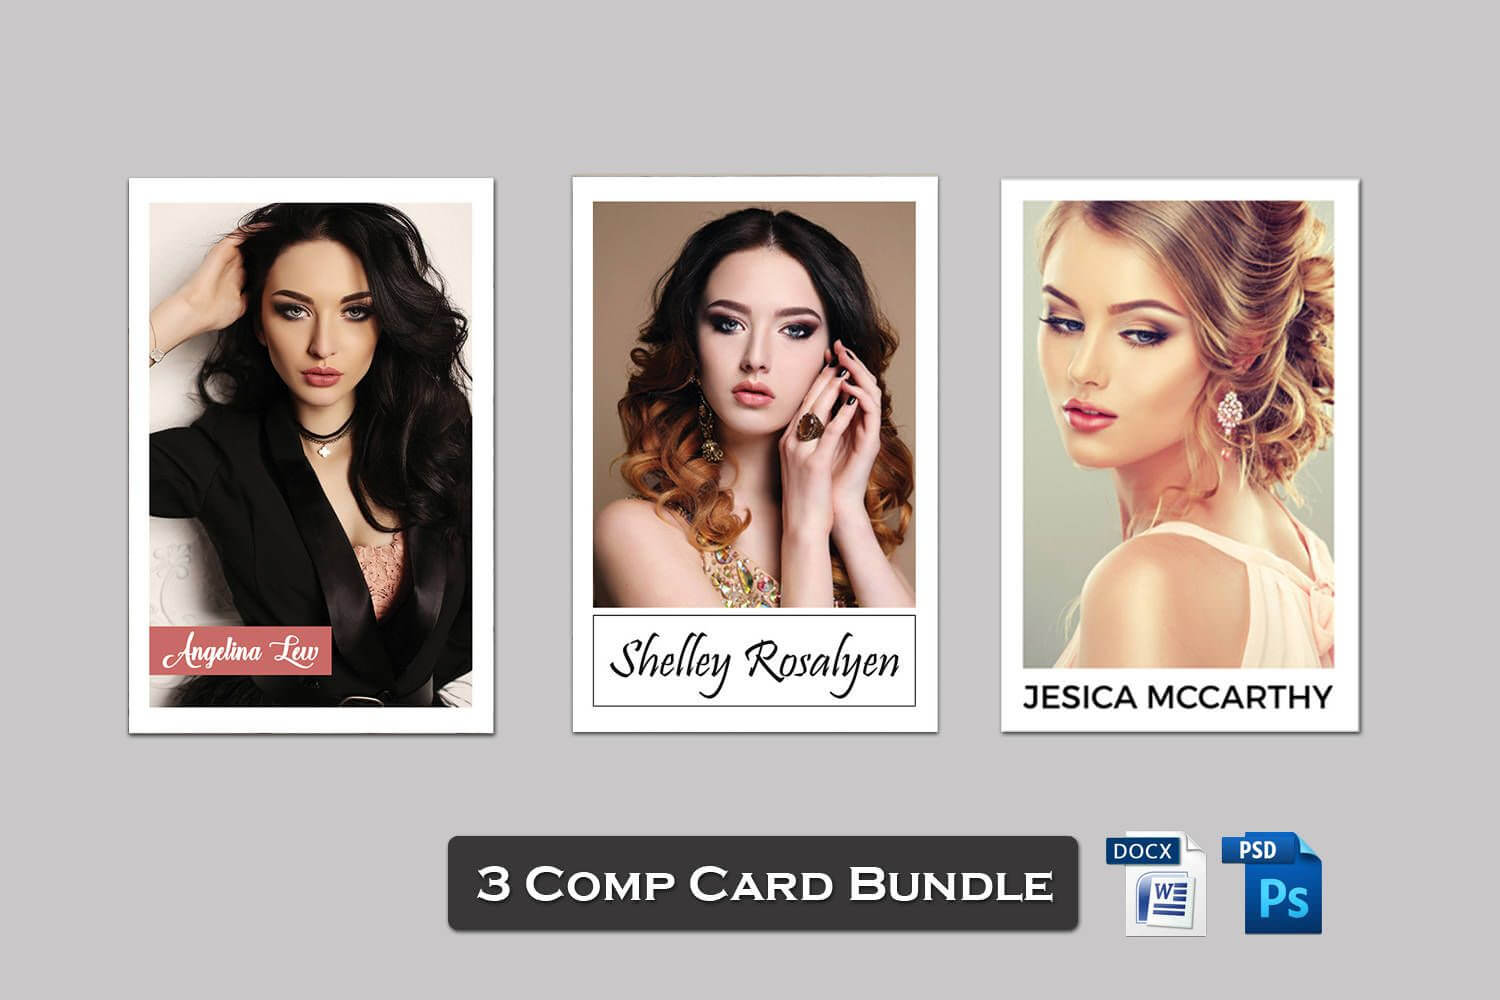 3 Model Comp Card Template Bundle | Modeling Comp Card Model Within Zed Card Template Free